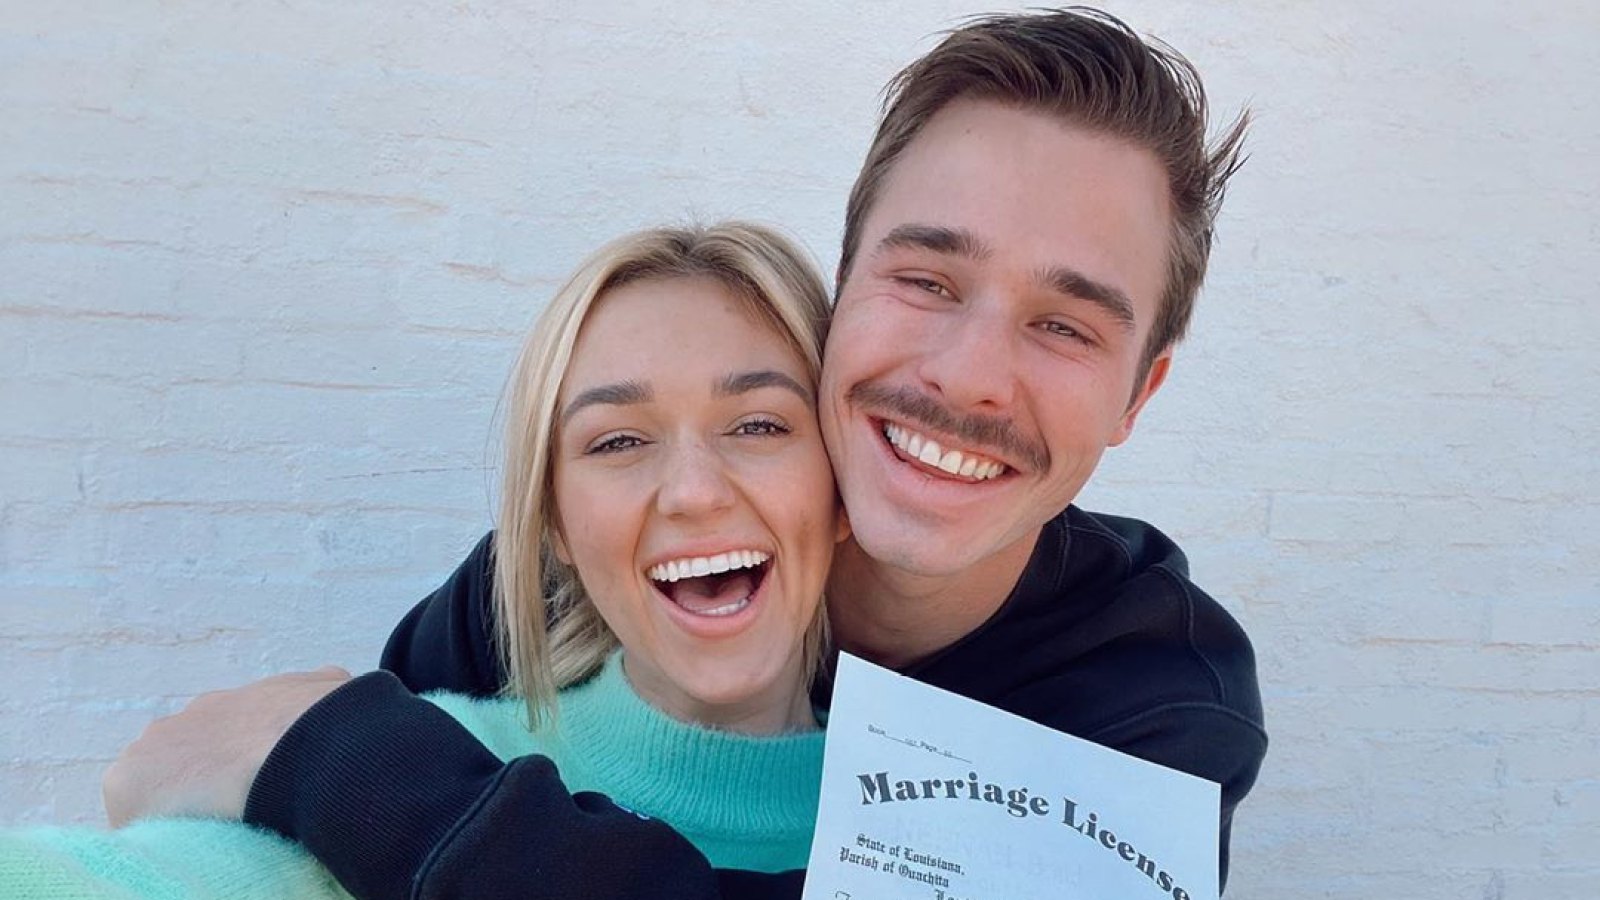 Duck Dynasty’s Sadie Robertson Marries Fiance Christian Huff in Louisiana 5 Months After Proposa